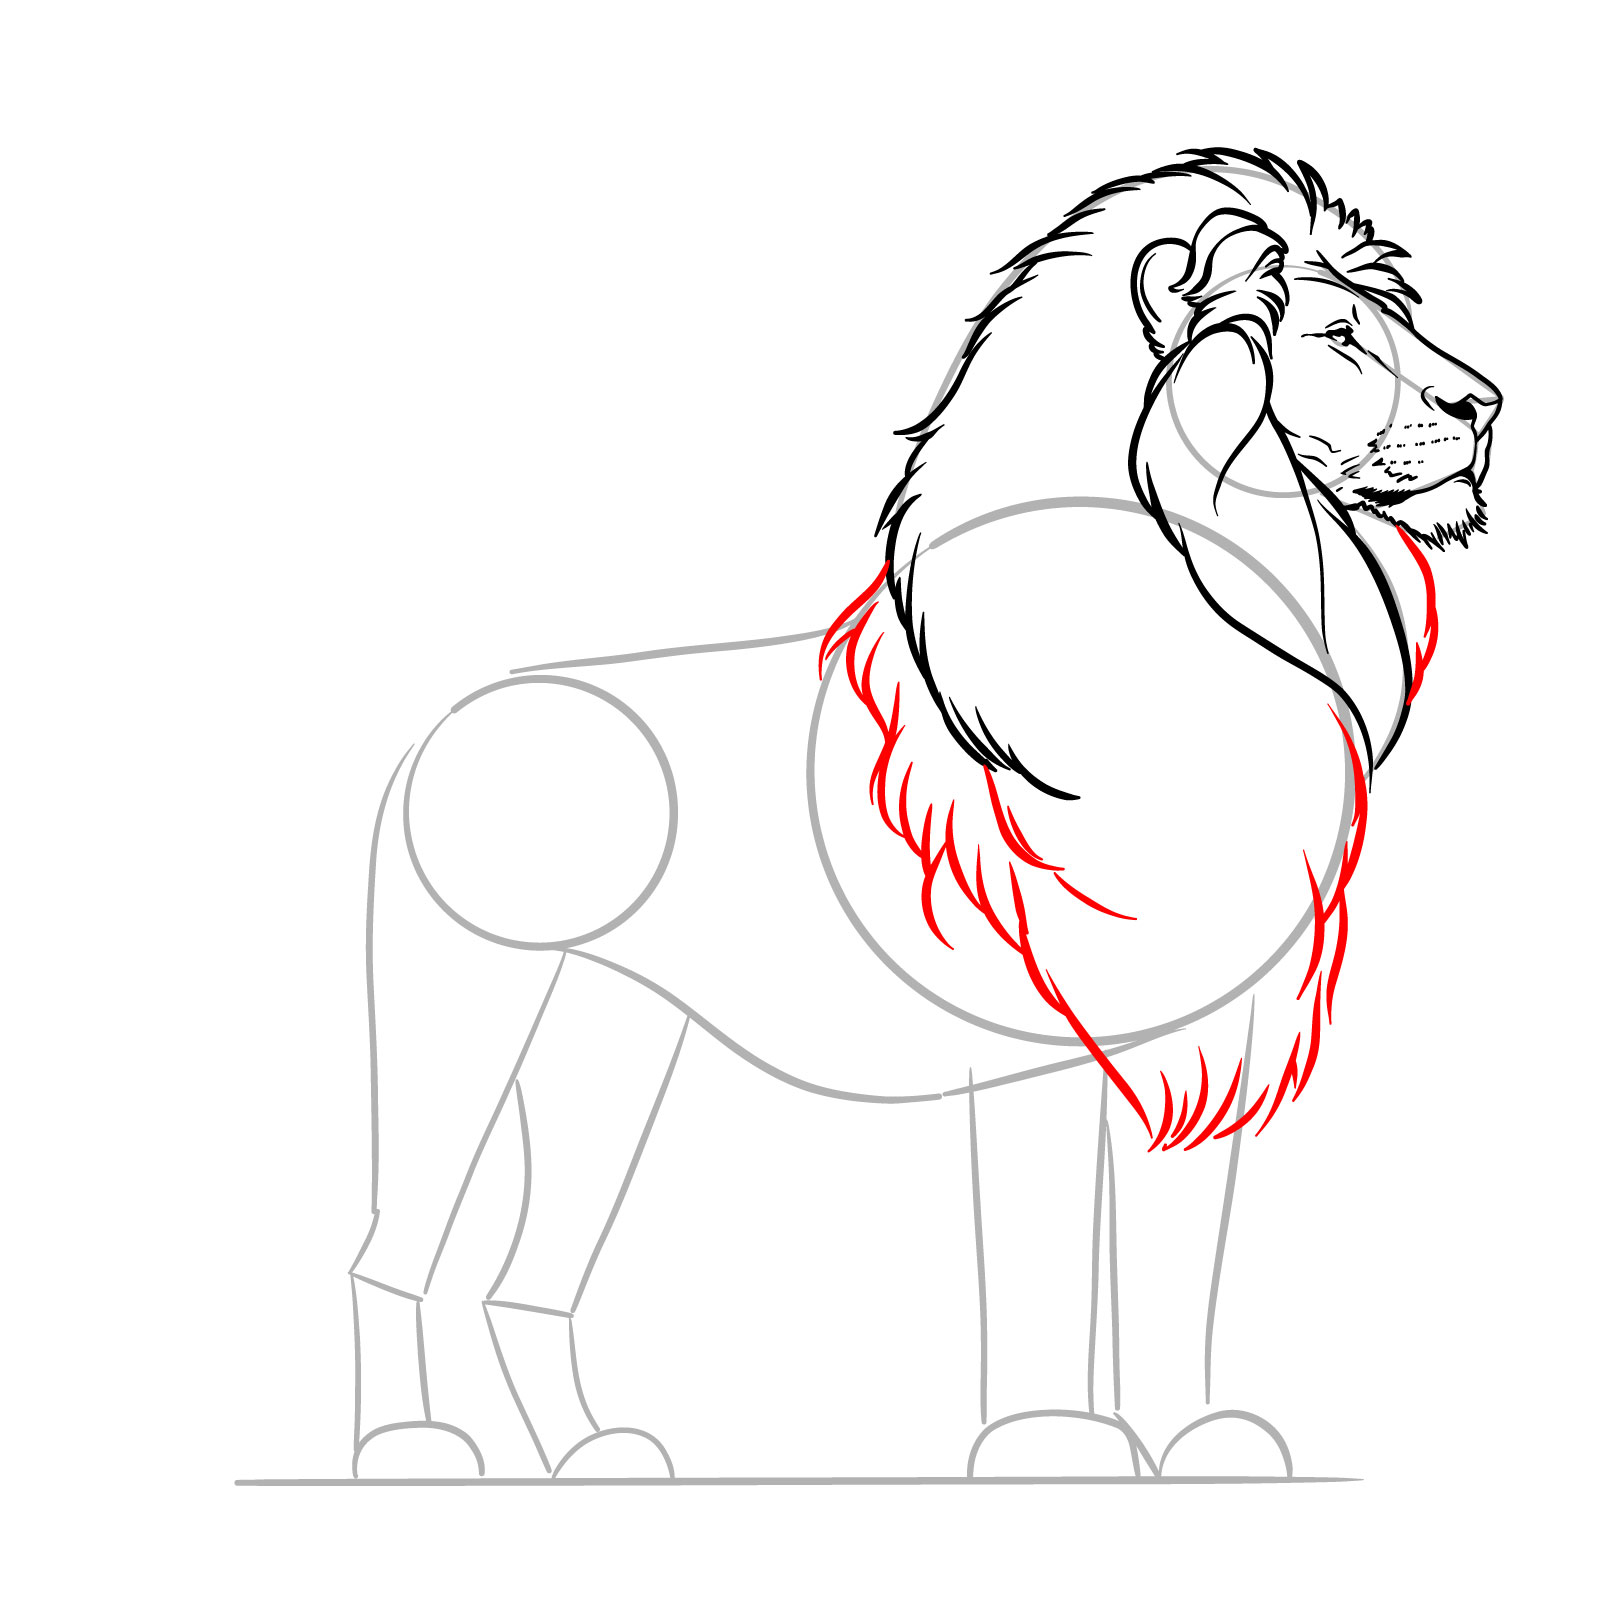 Finalizing the mane outline in a standing lion sketch - step 11